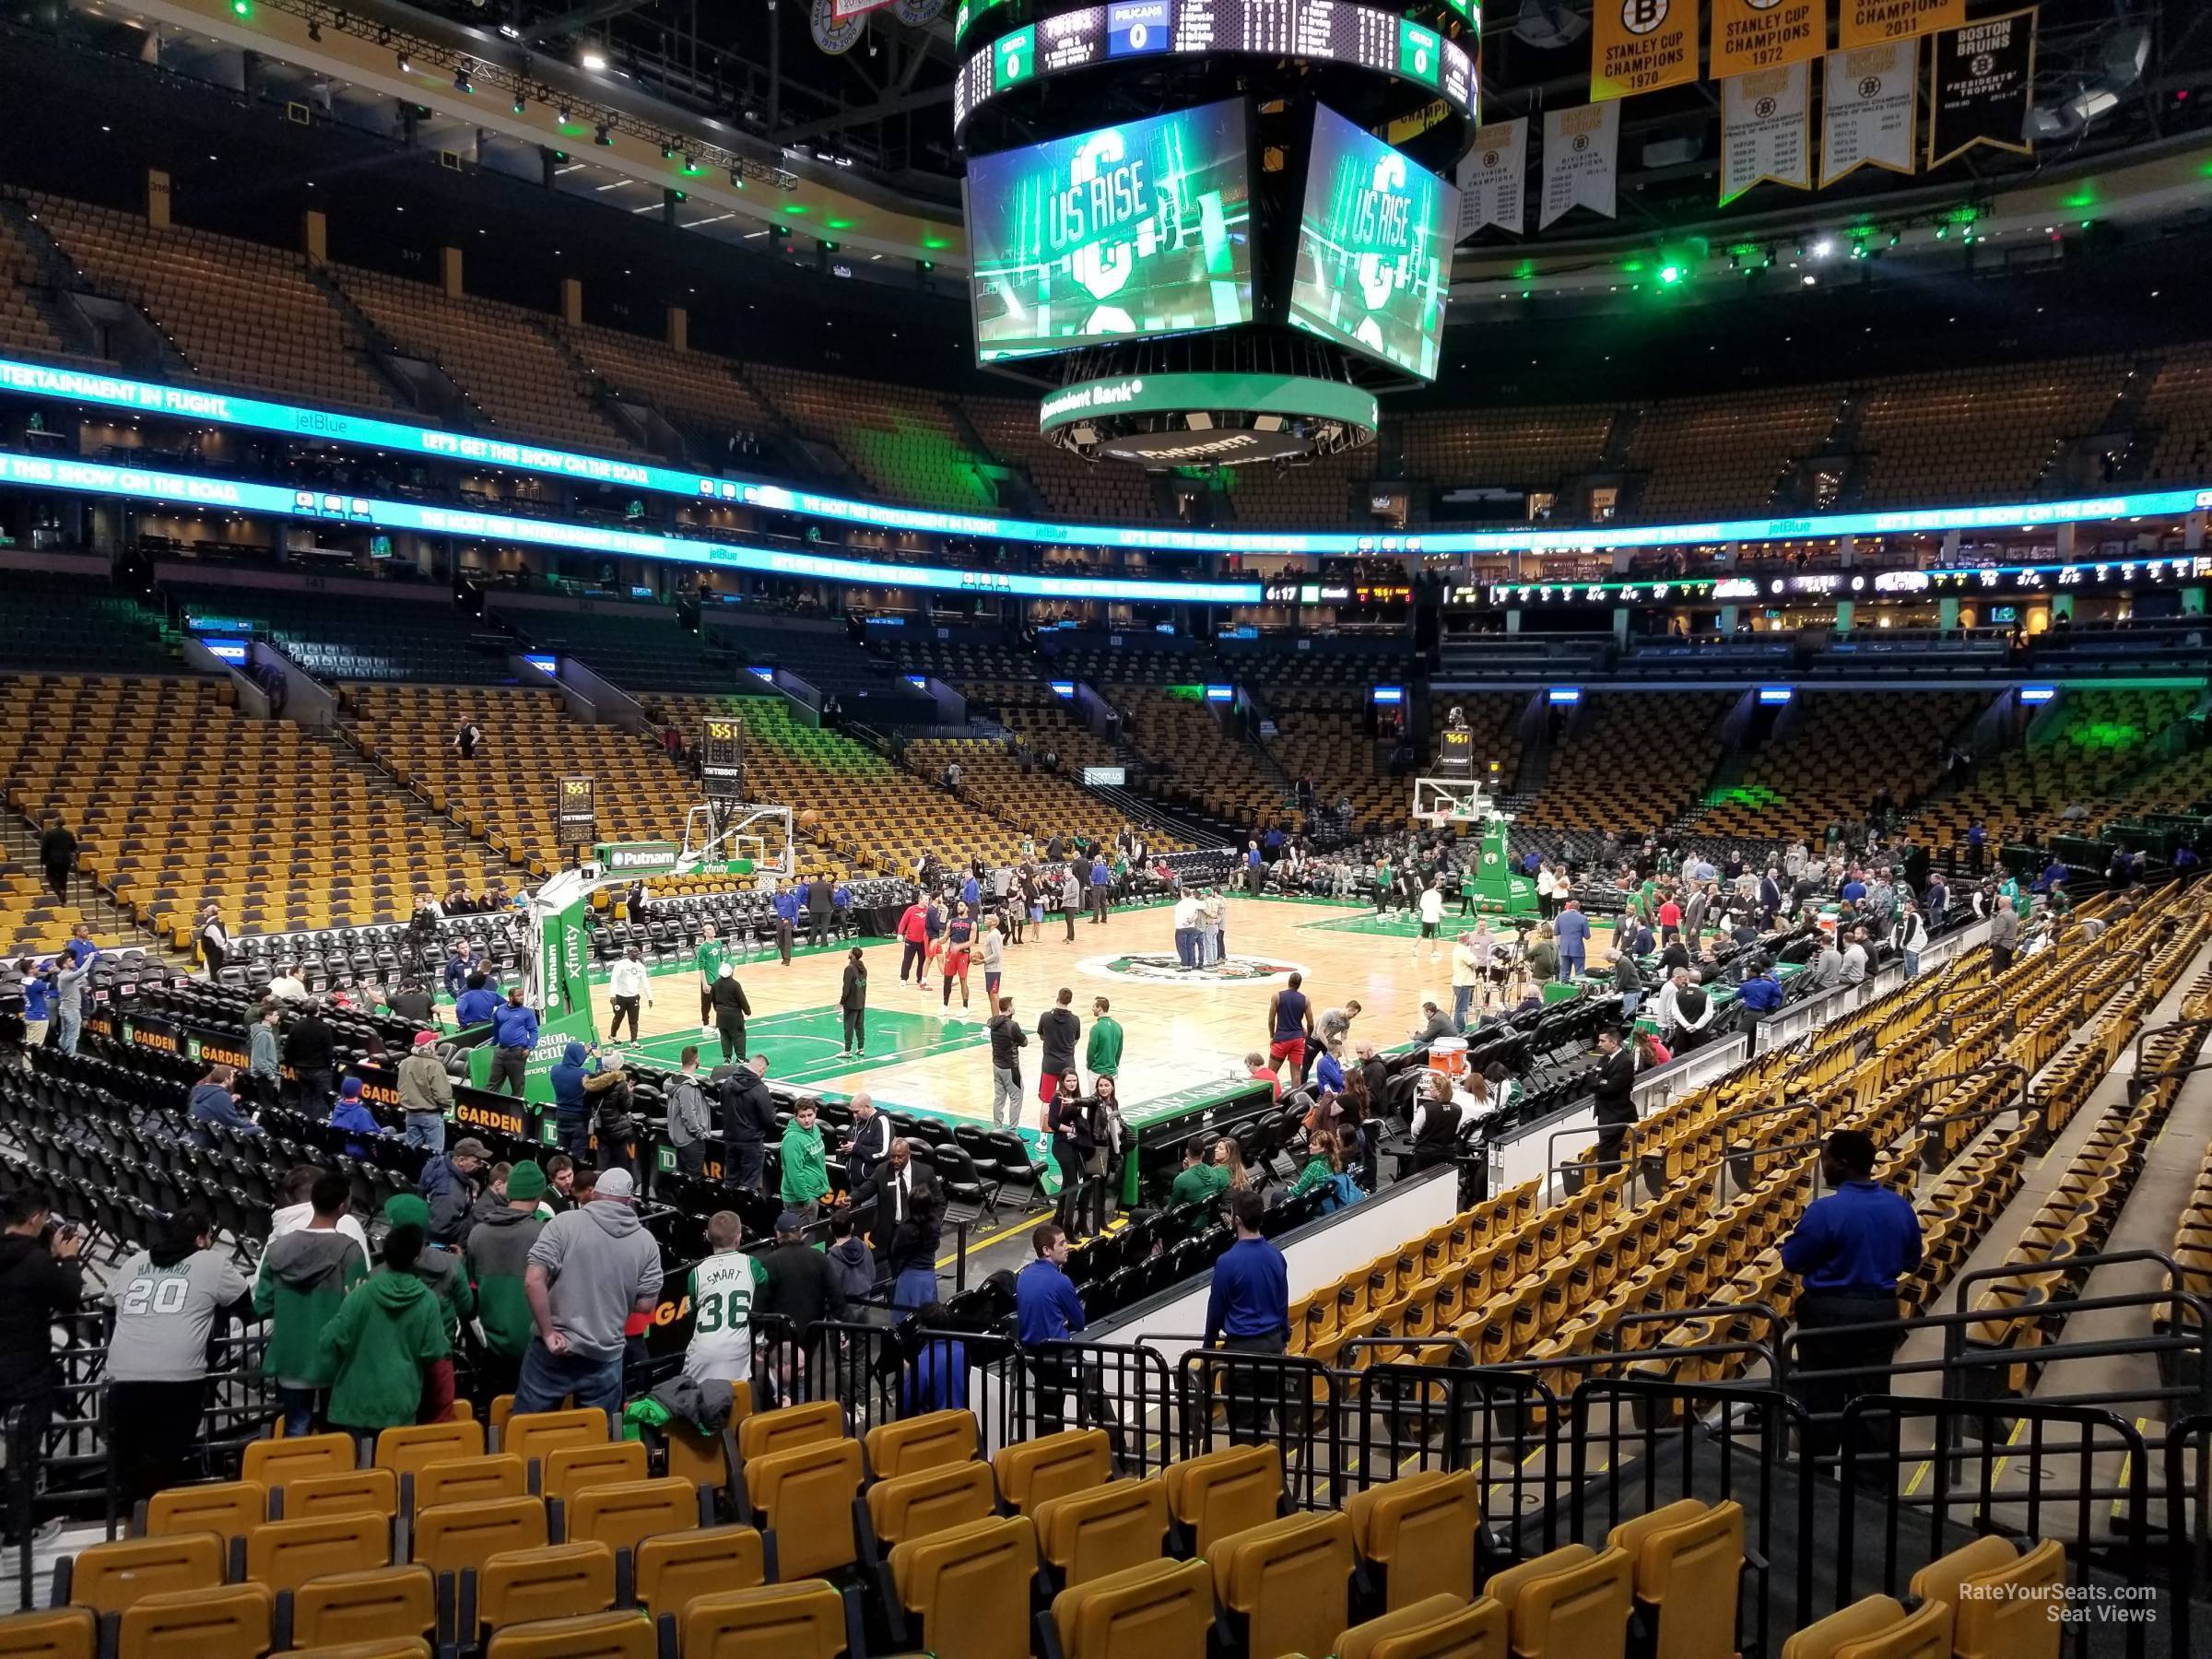 loge 4, row 13 seat view  for basketball - td garden